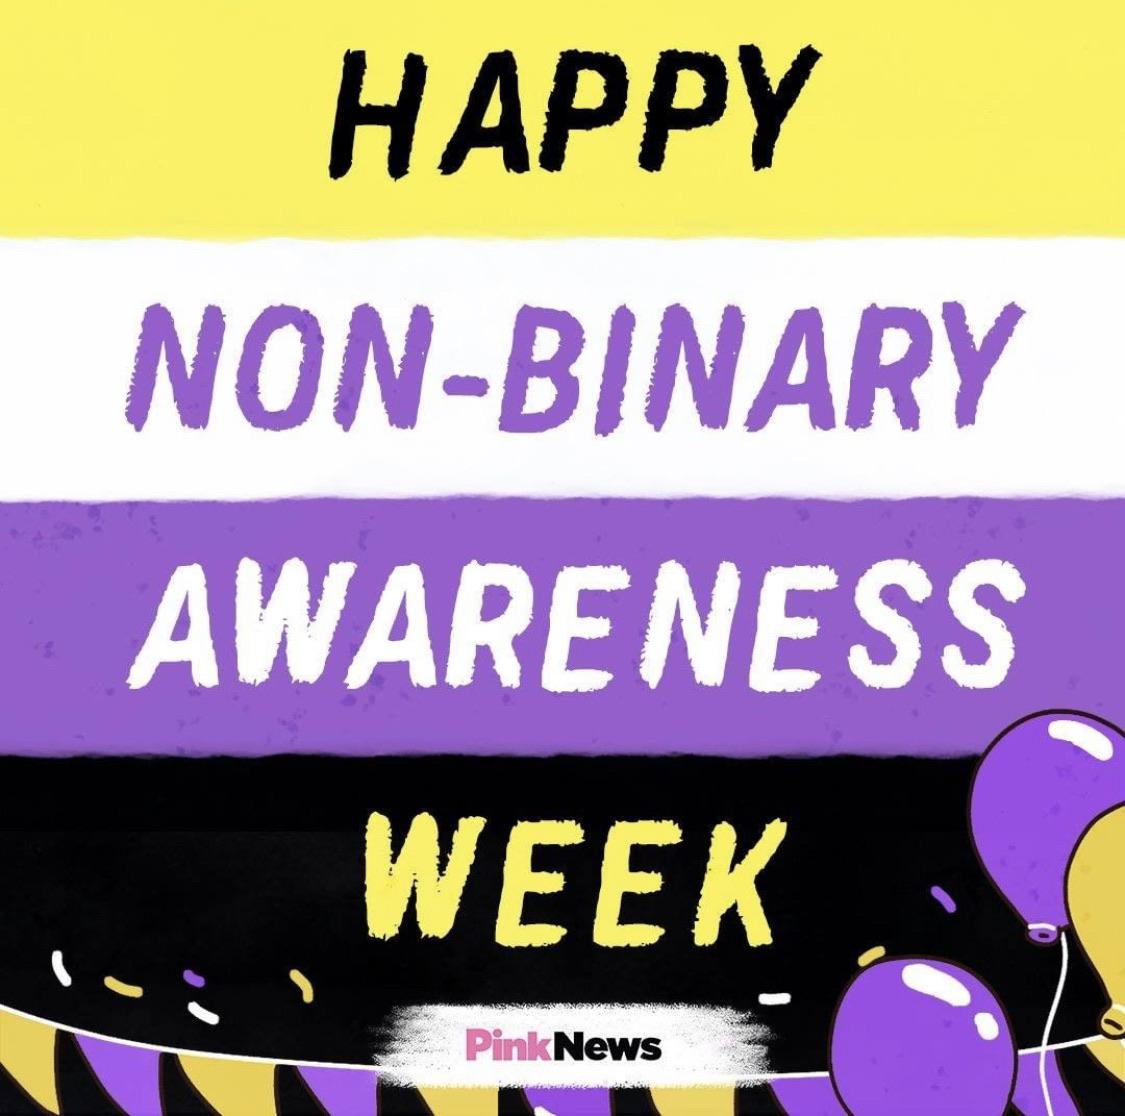 NonBinary Awareness Week Achieve together